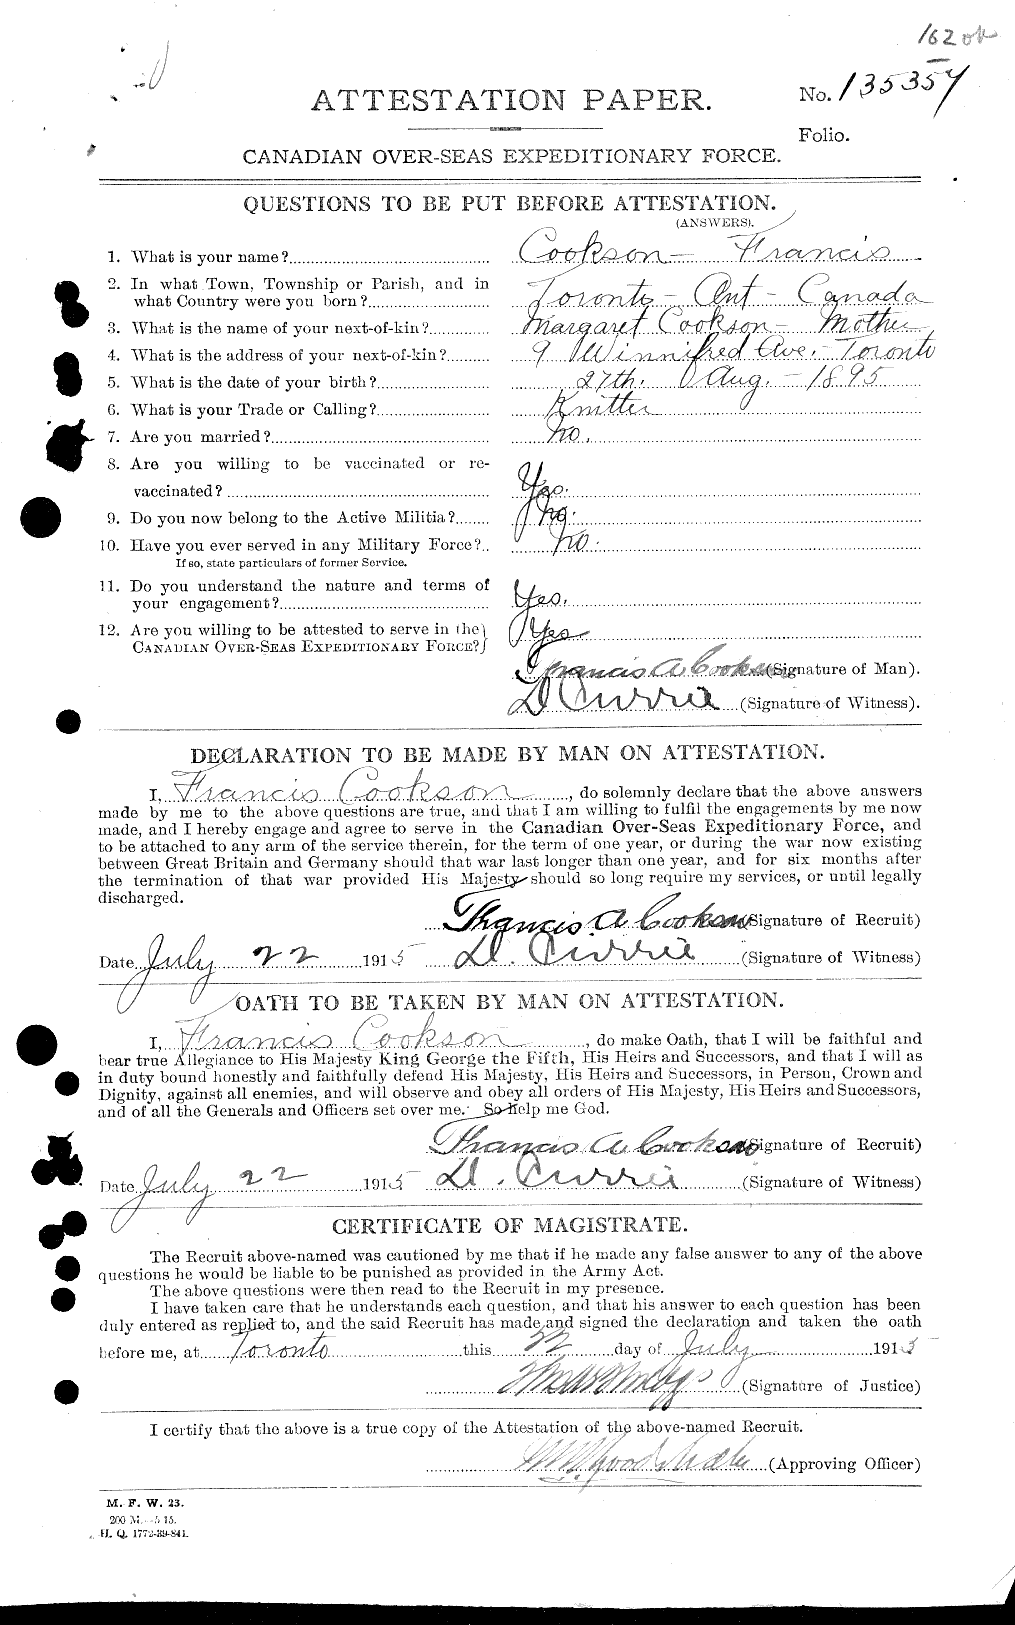 Personnel Records of the First World War - CEF 036375a